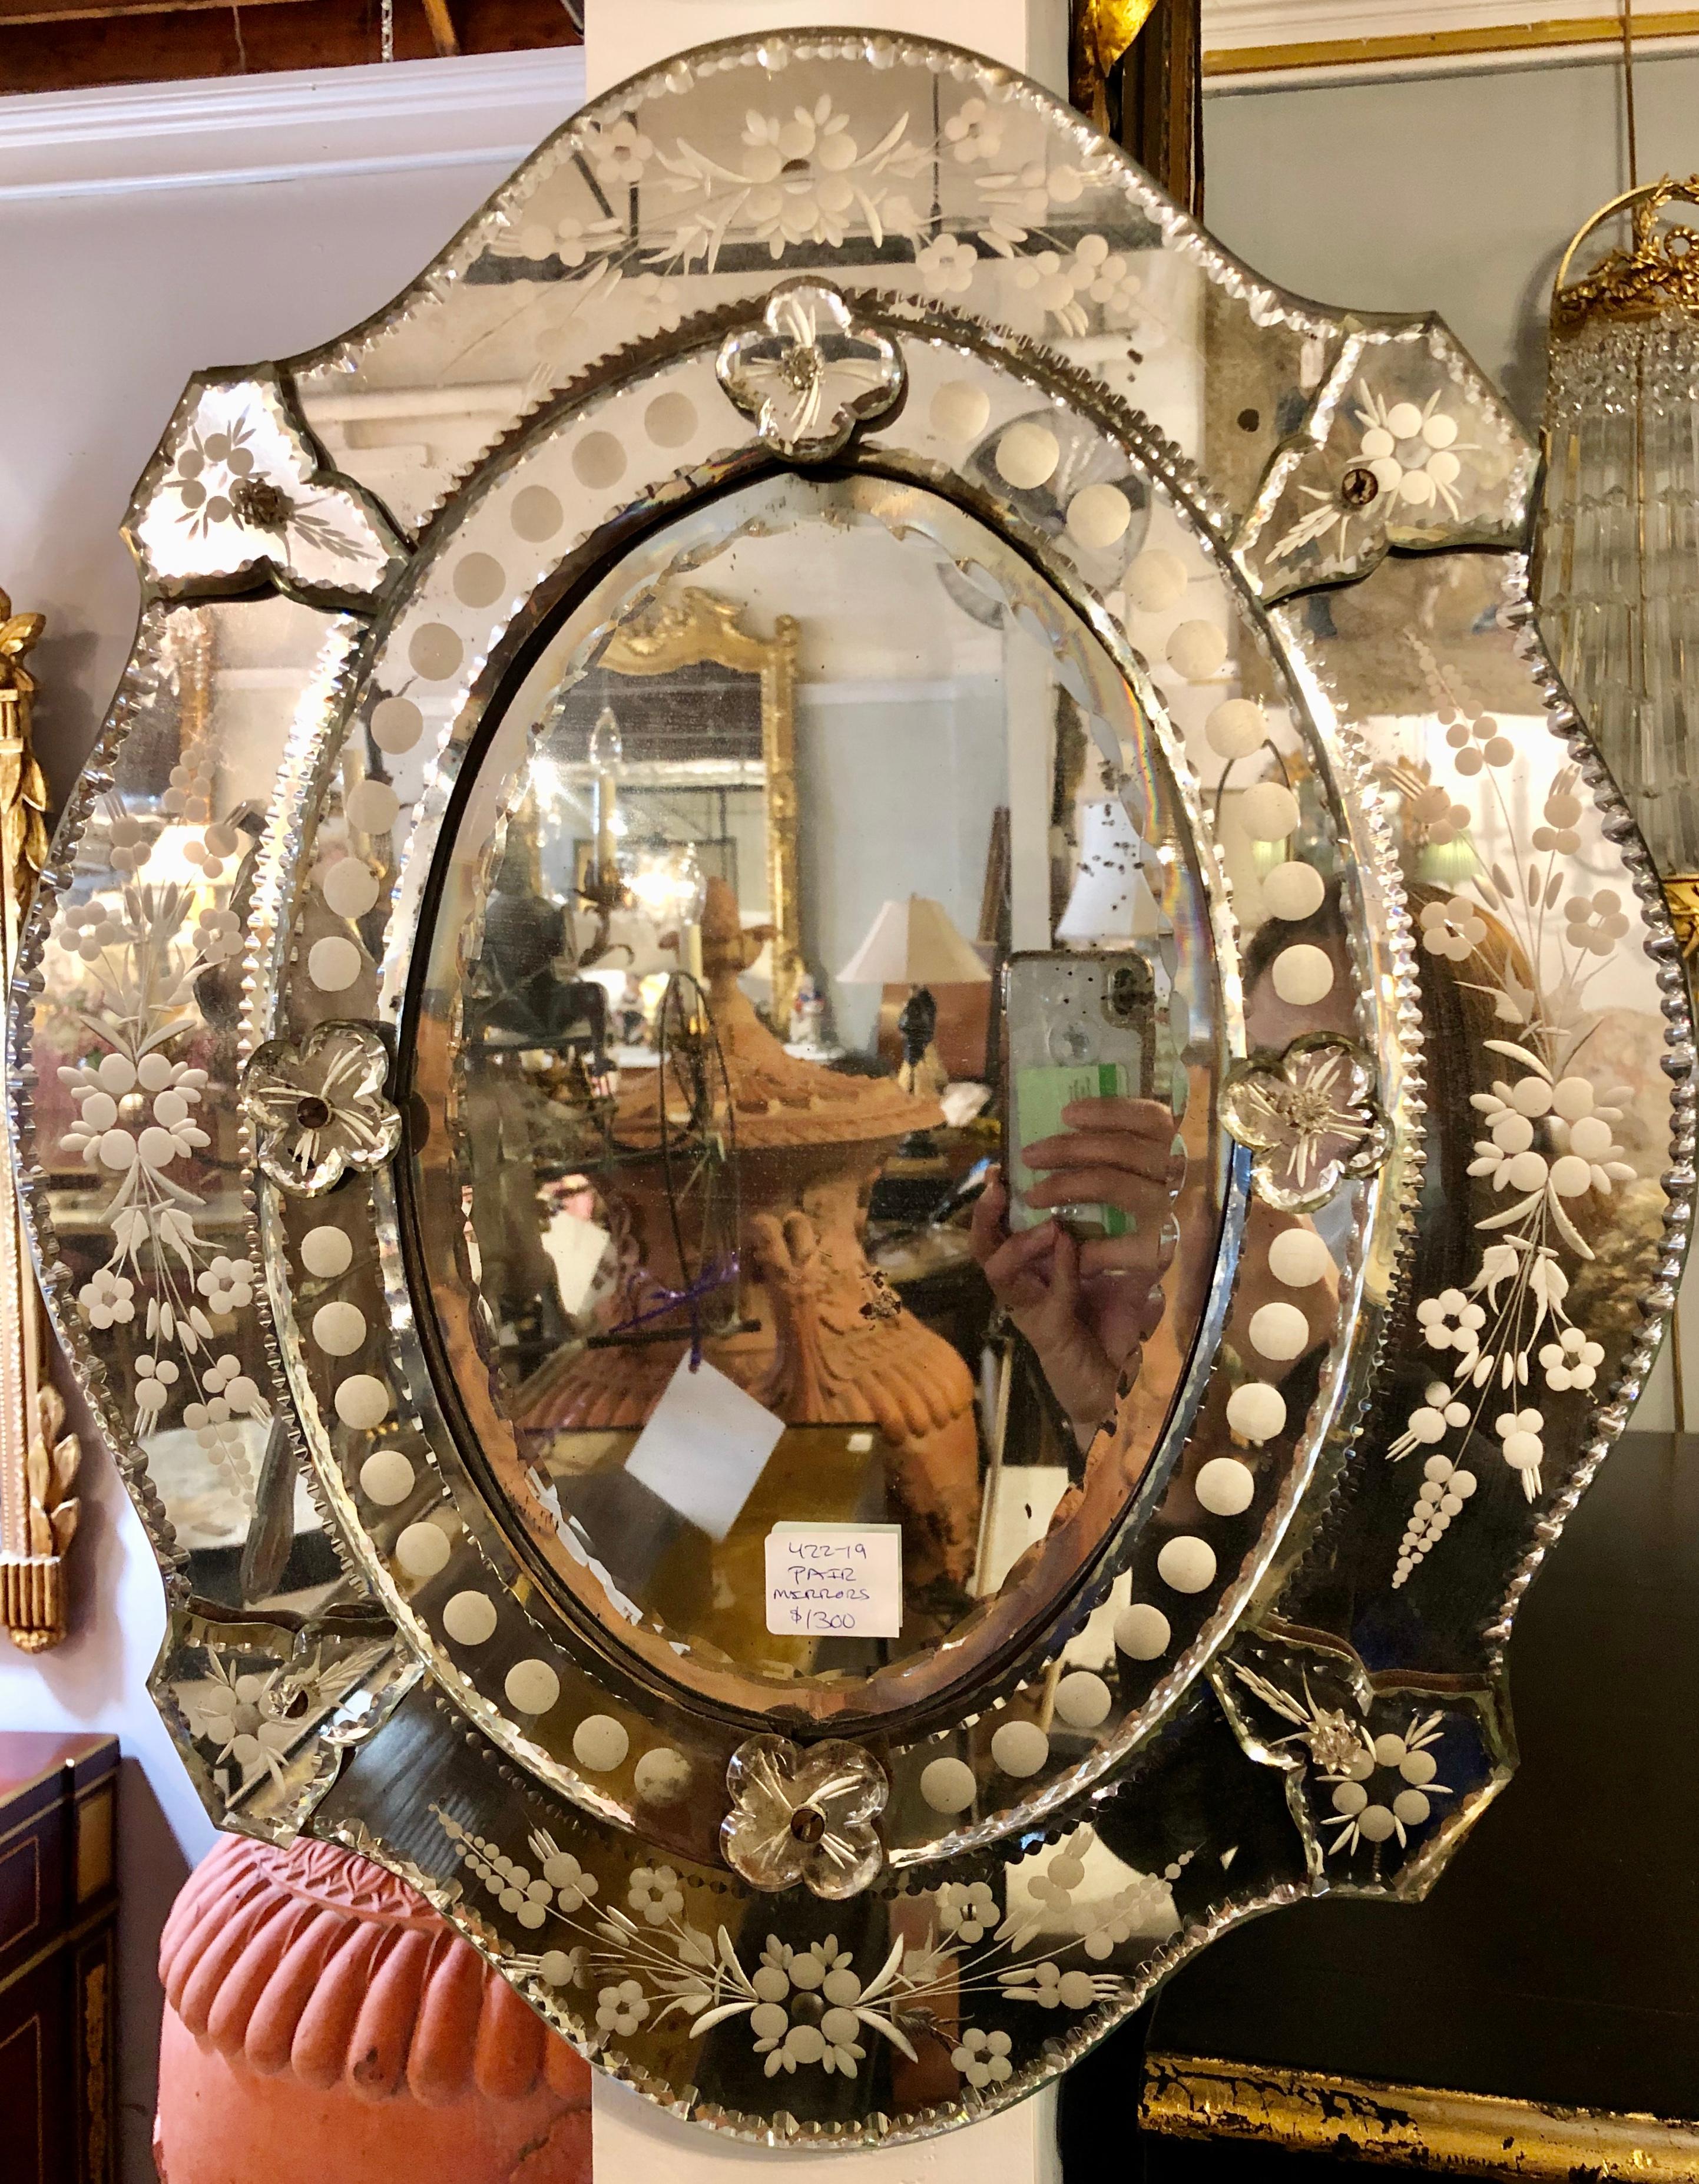 Pair of Venetian etched glass wall mirrors.
 